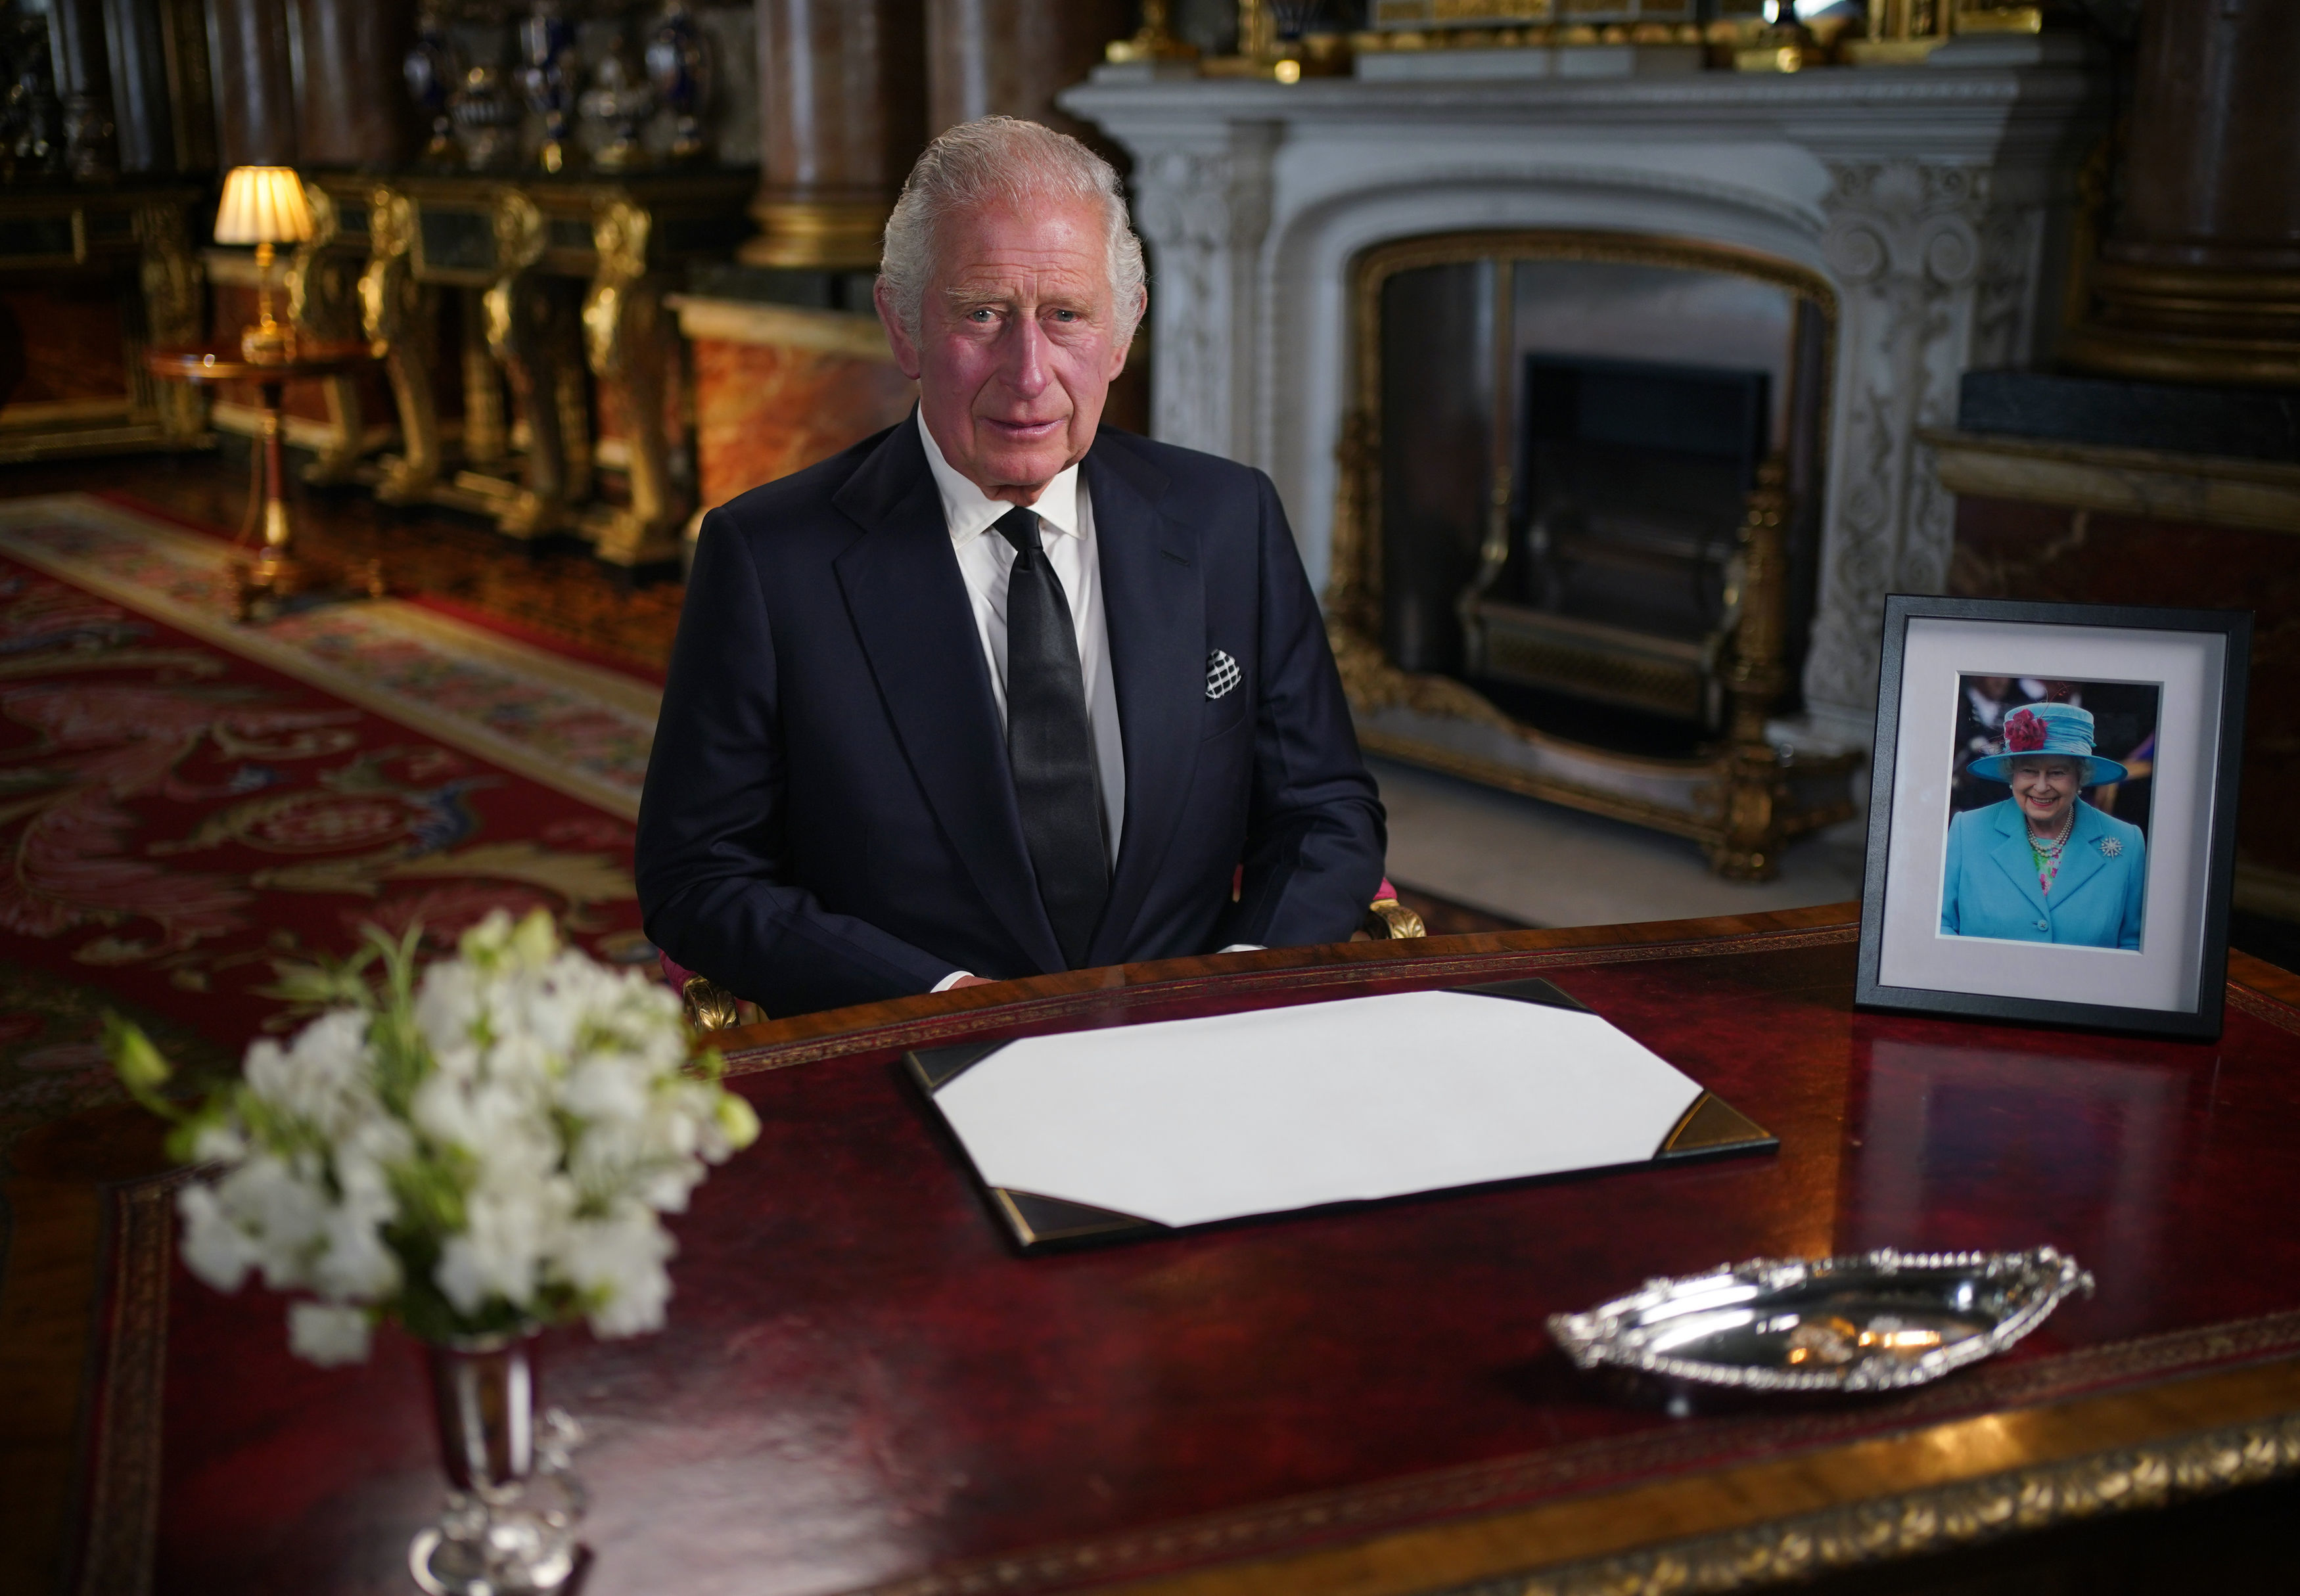 King Charles III delivers his address to the nation and the Commonwealth from Buckingham Palace following the death of Queen Elizabeth II on Thursday 8th September in Balmoral, on September 9, 2022 in London, England | Source: Getty Images